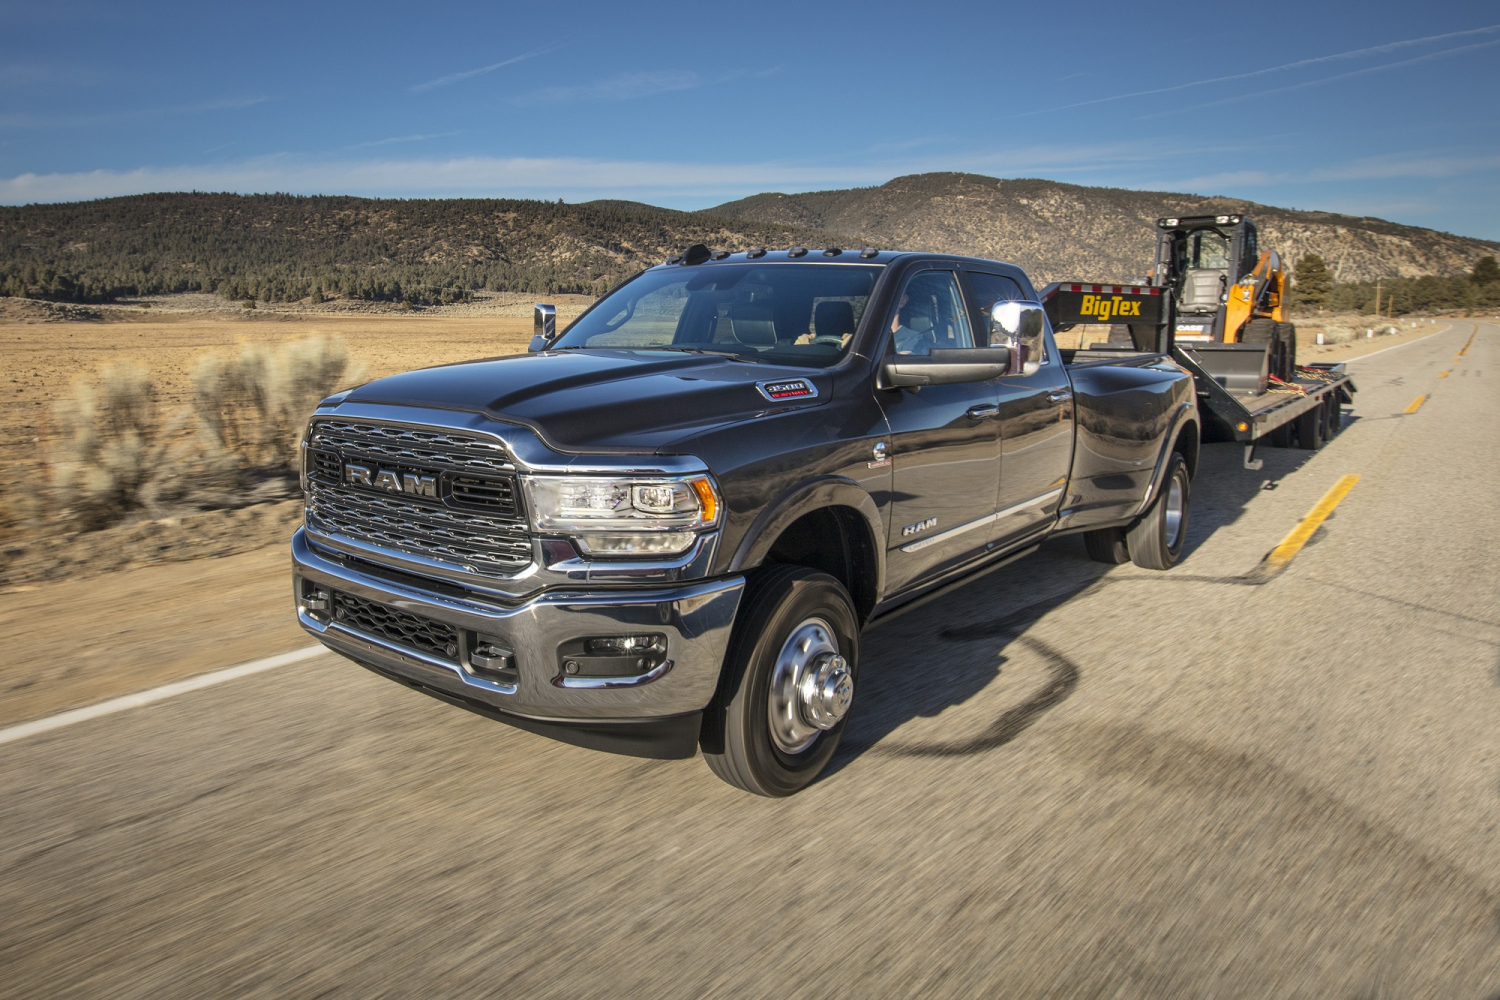 2019 Ram 3500 Can Do Anything You Want